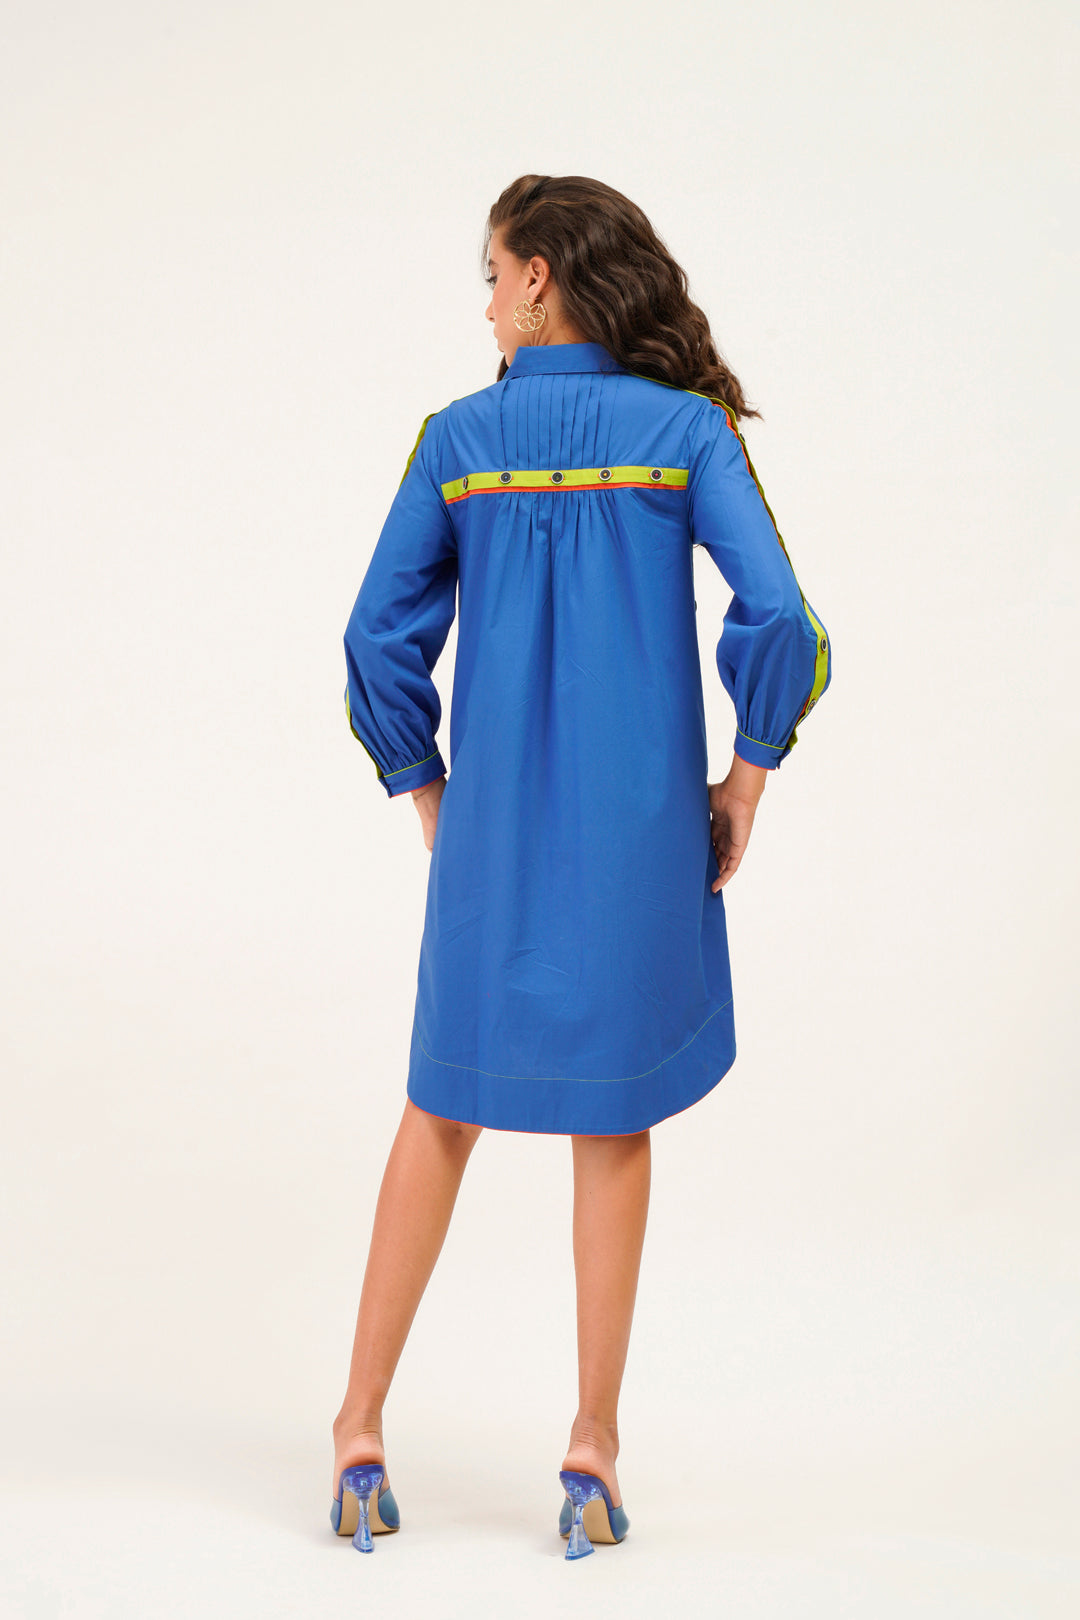 Alicia A Line Dress with Button Detailing on Sleeves